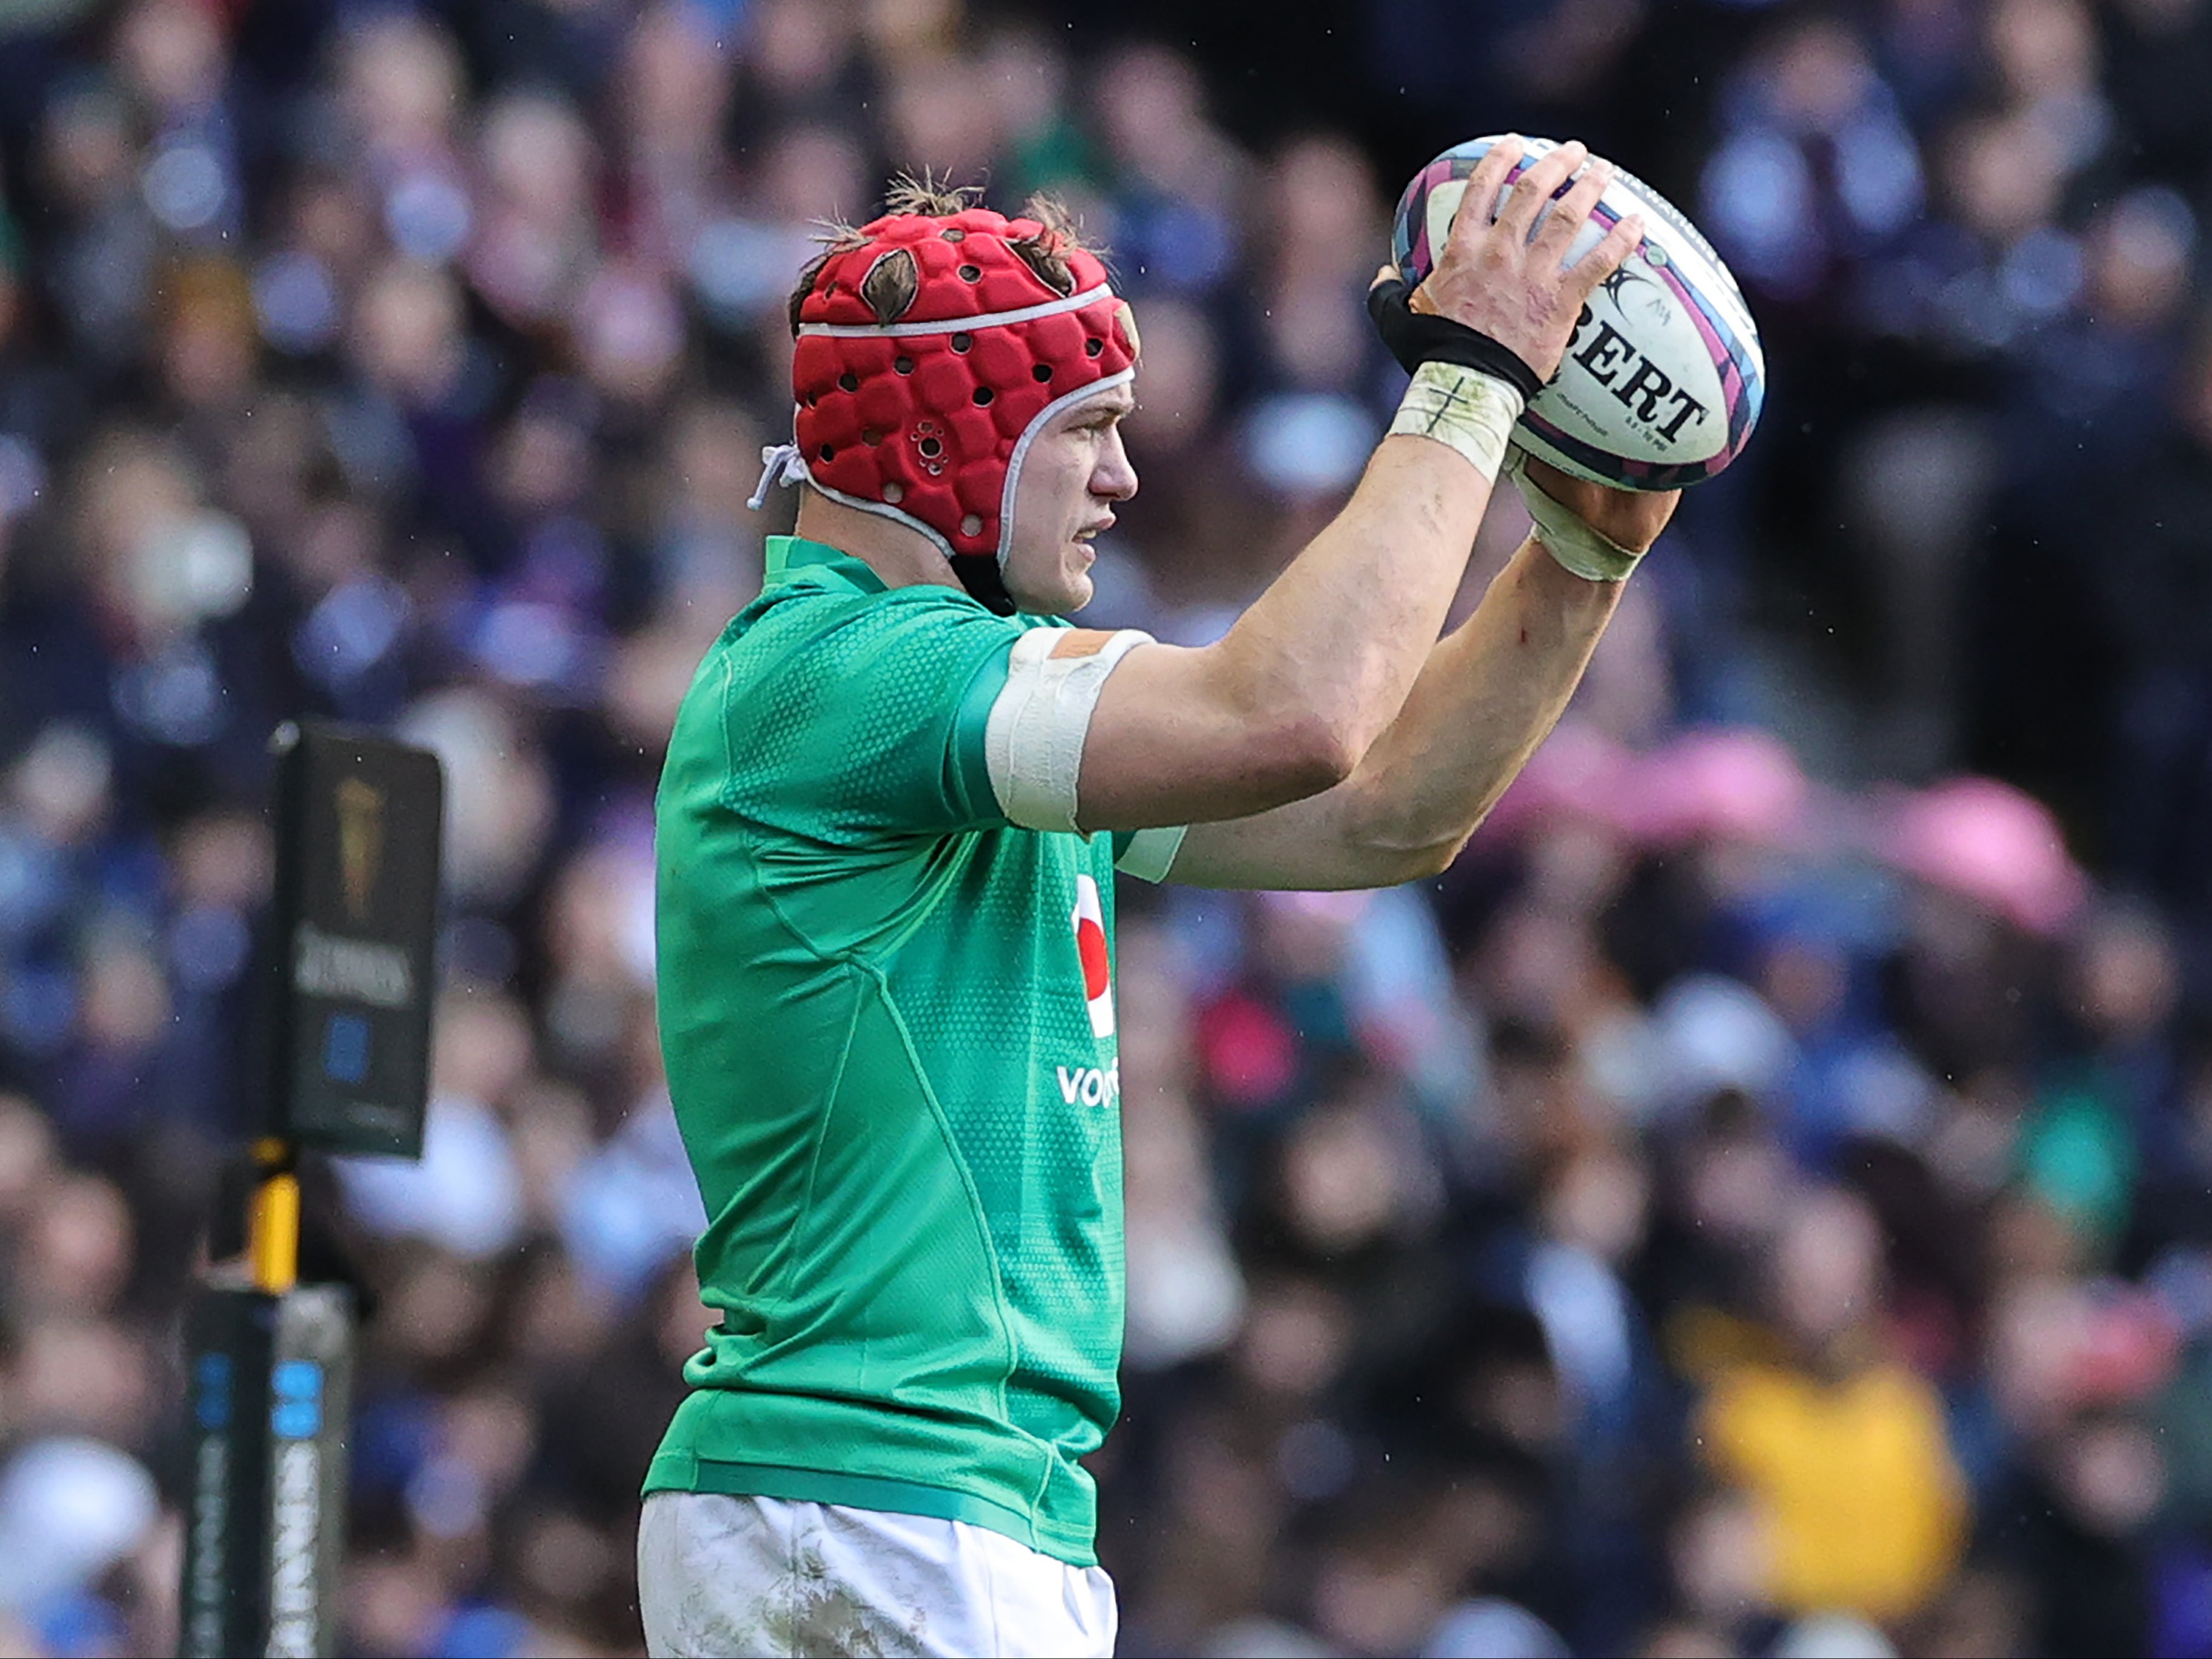 Injuries to both Ireland hookers mean Josh van der Flier has been forced to throw at the lineout